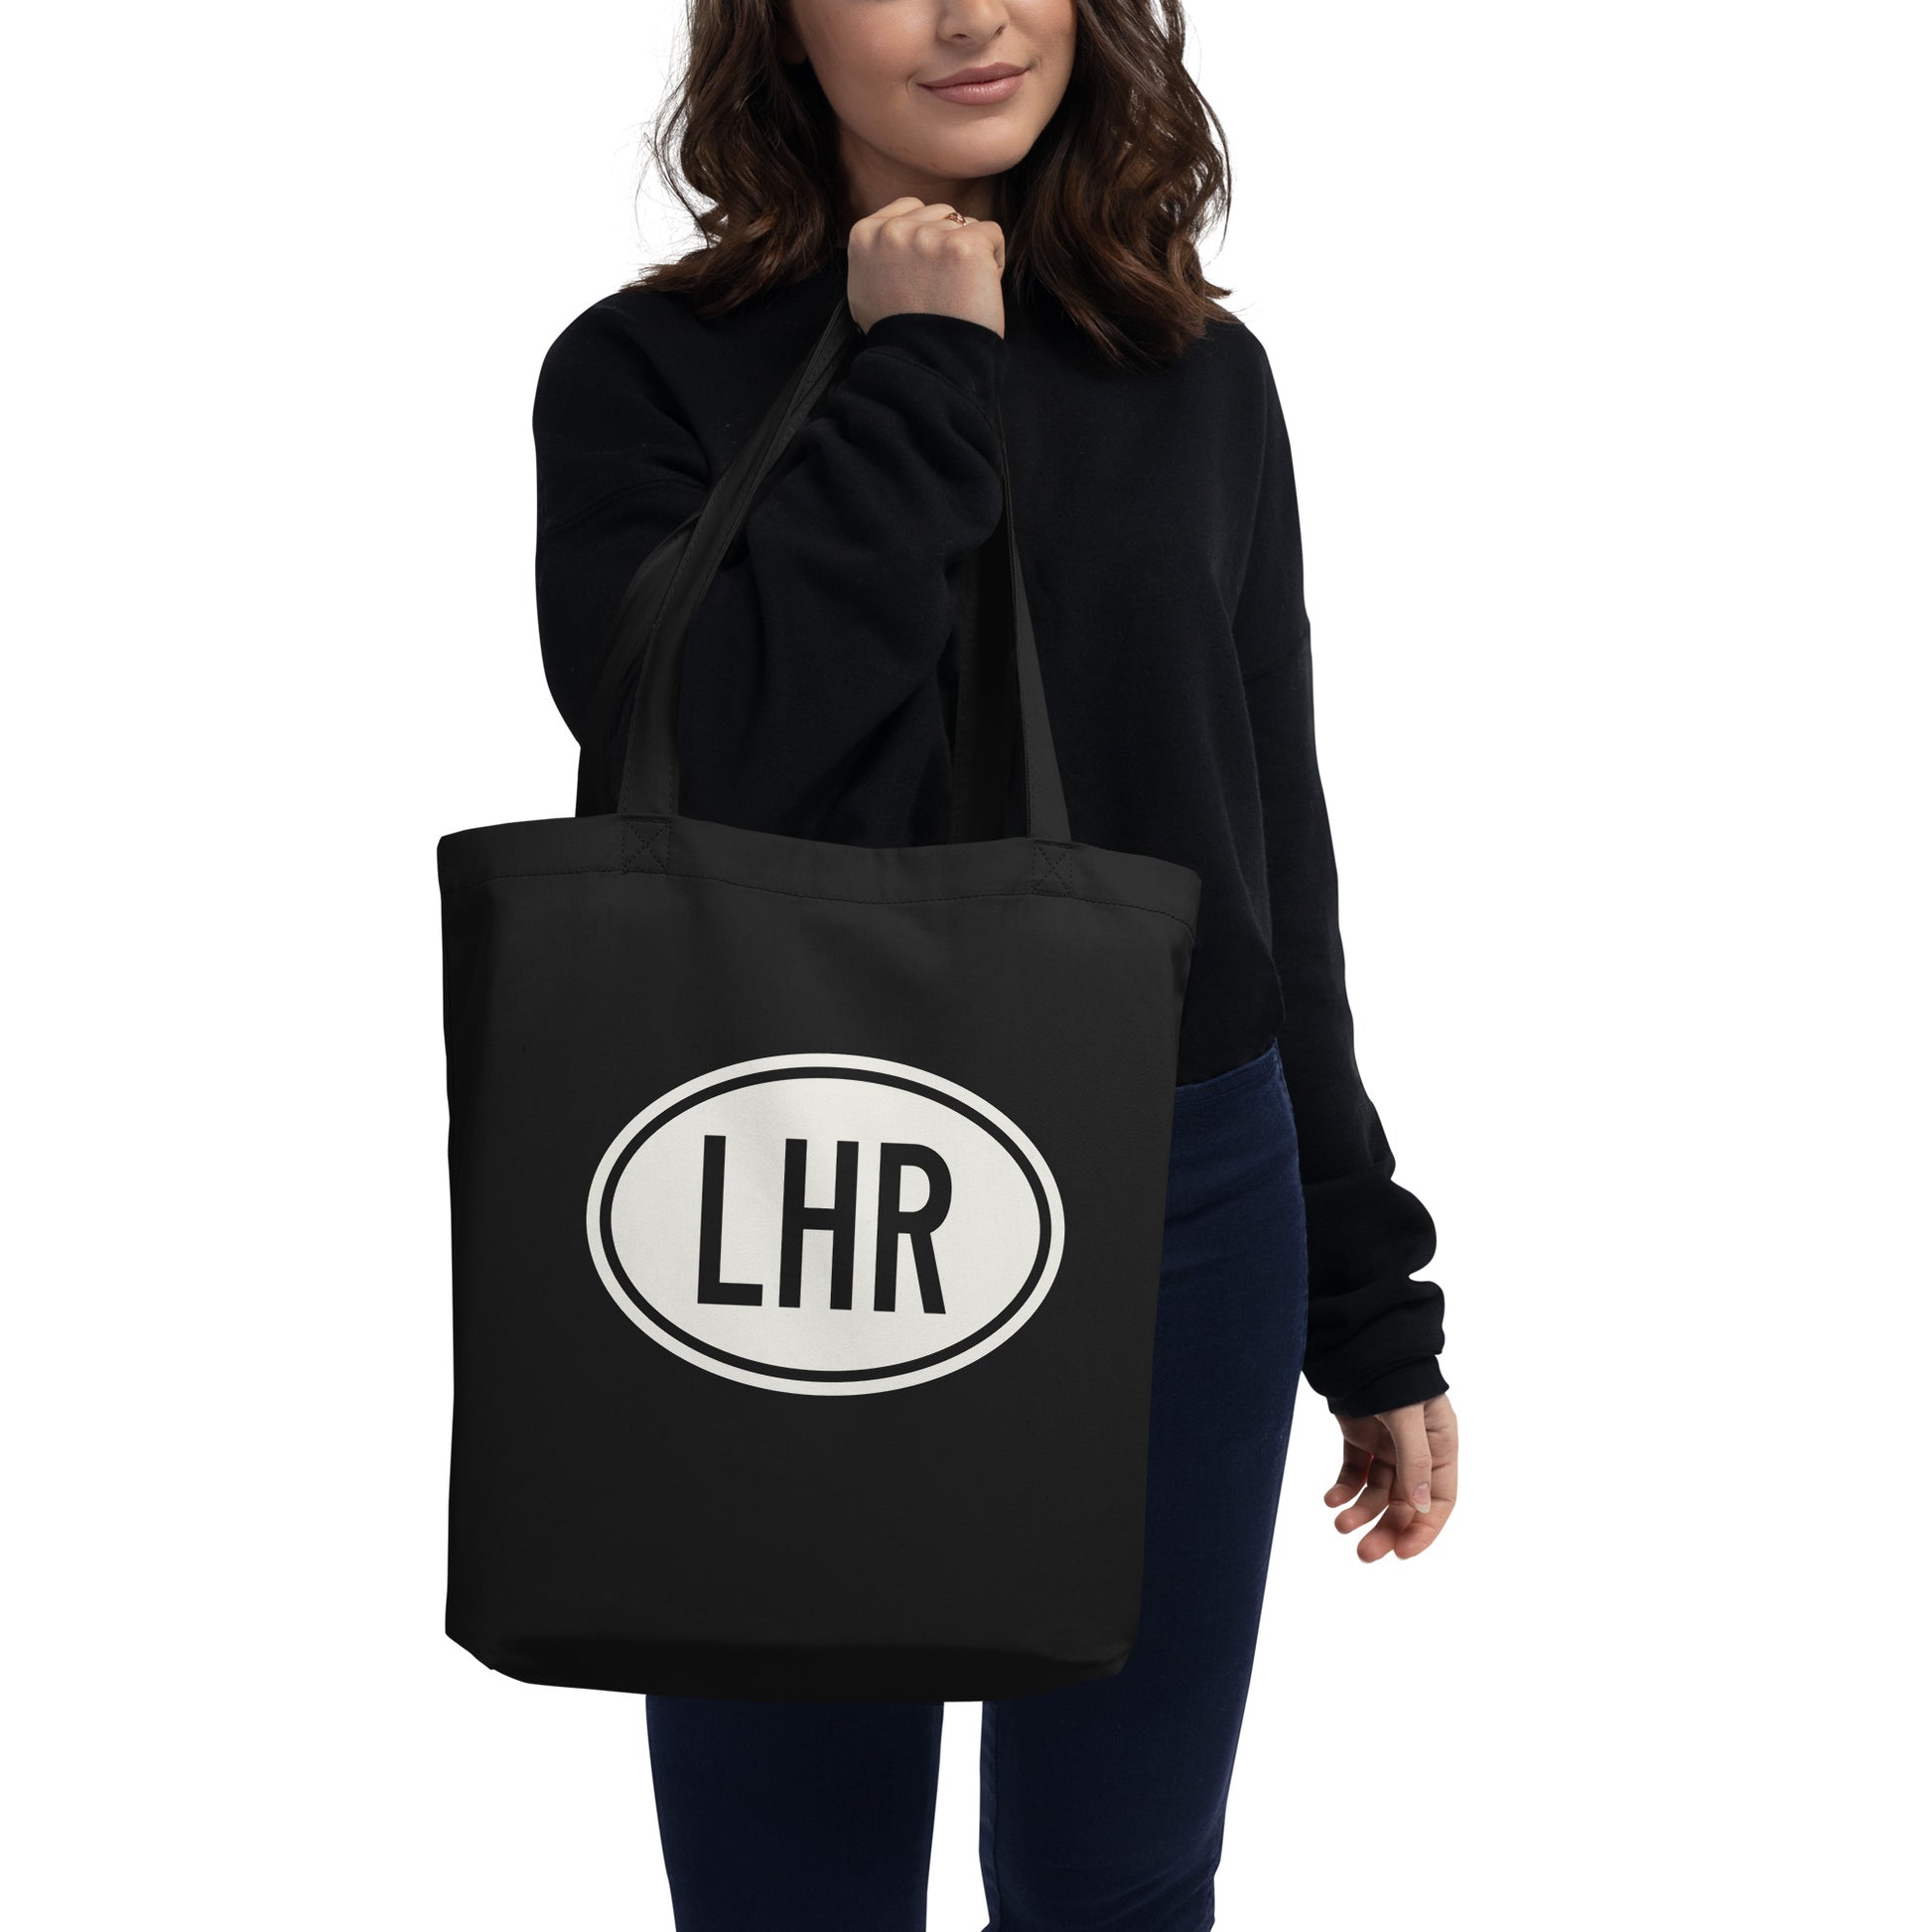 Unique Travel Gift Organic Tote - White Oval • LHR London • YHM Designs - Image 03